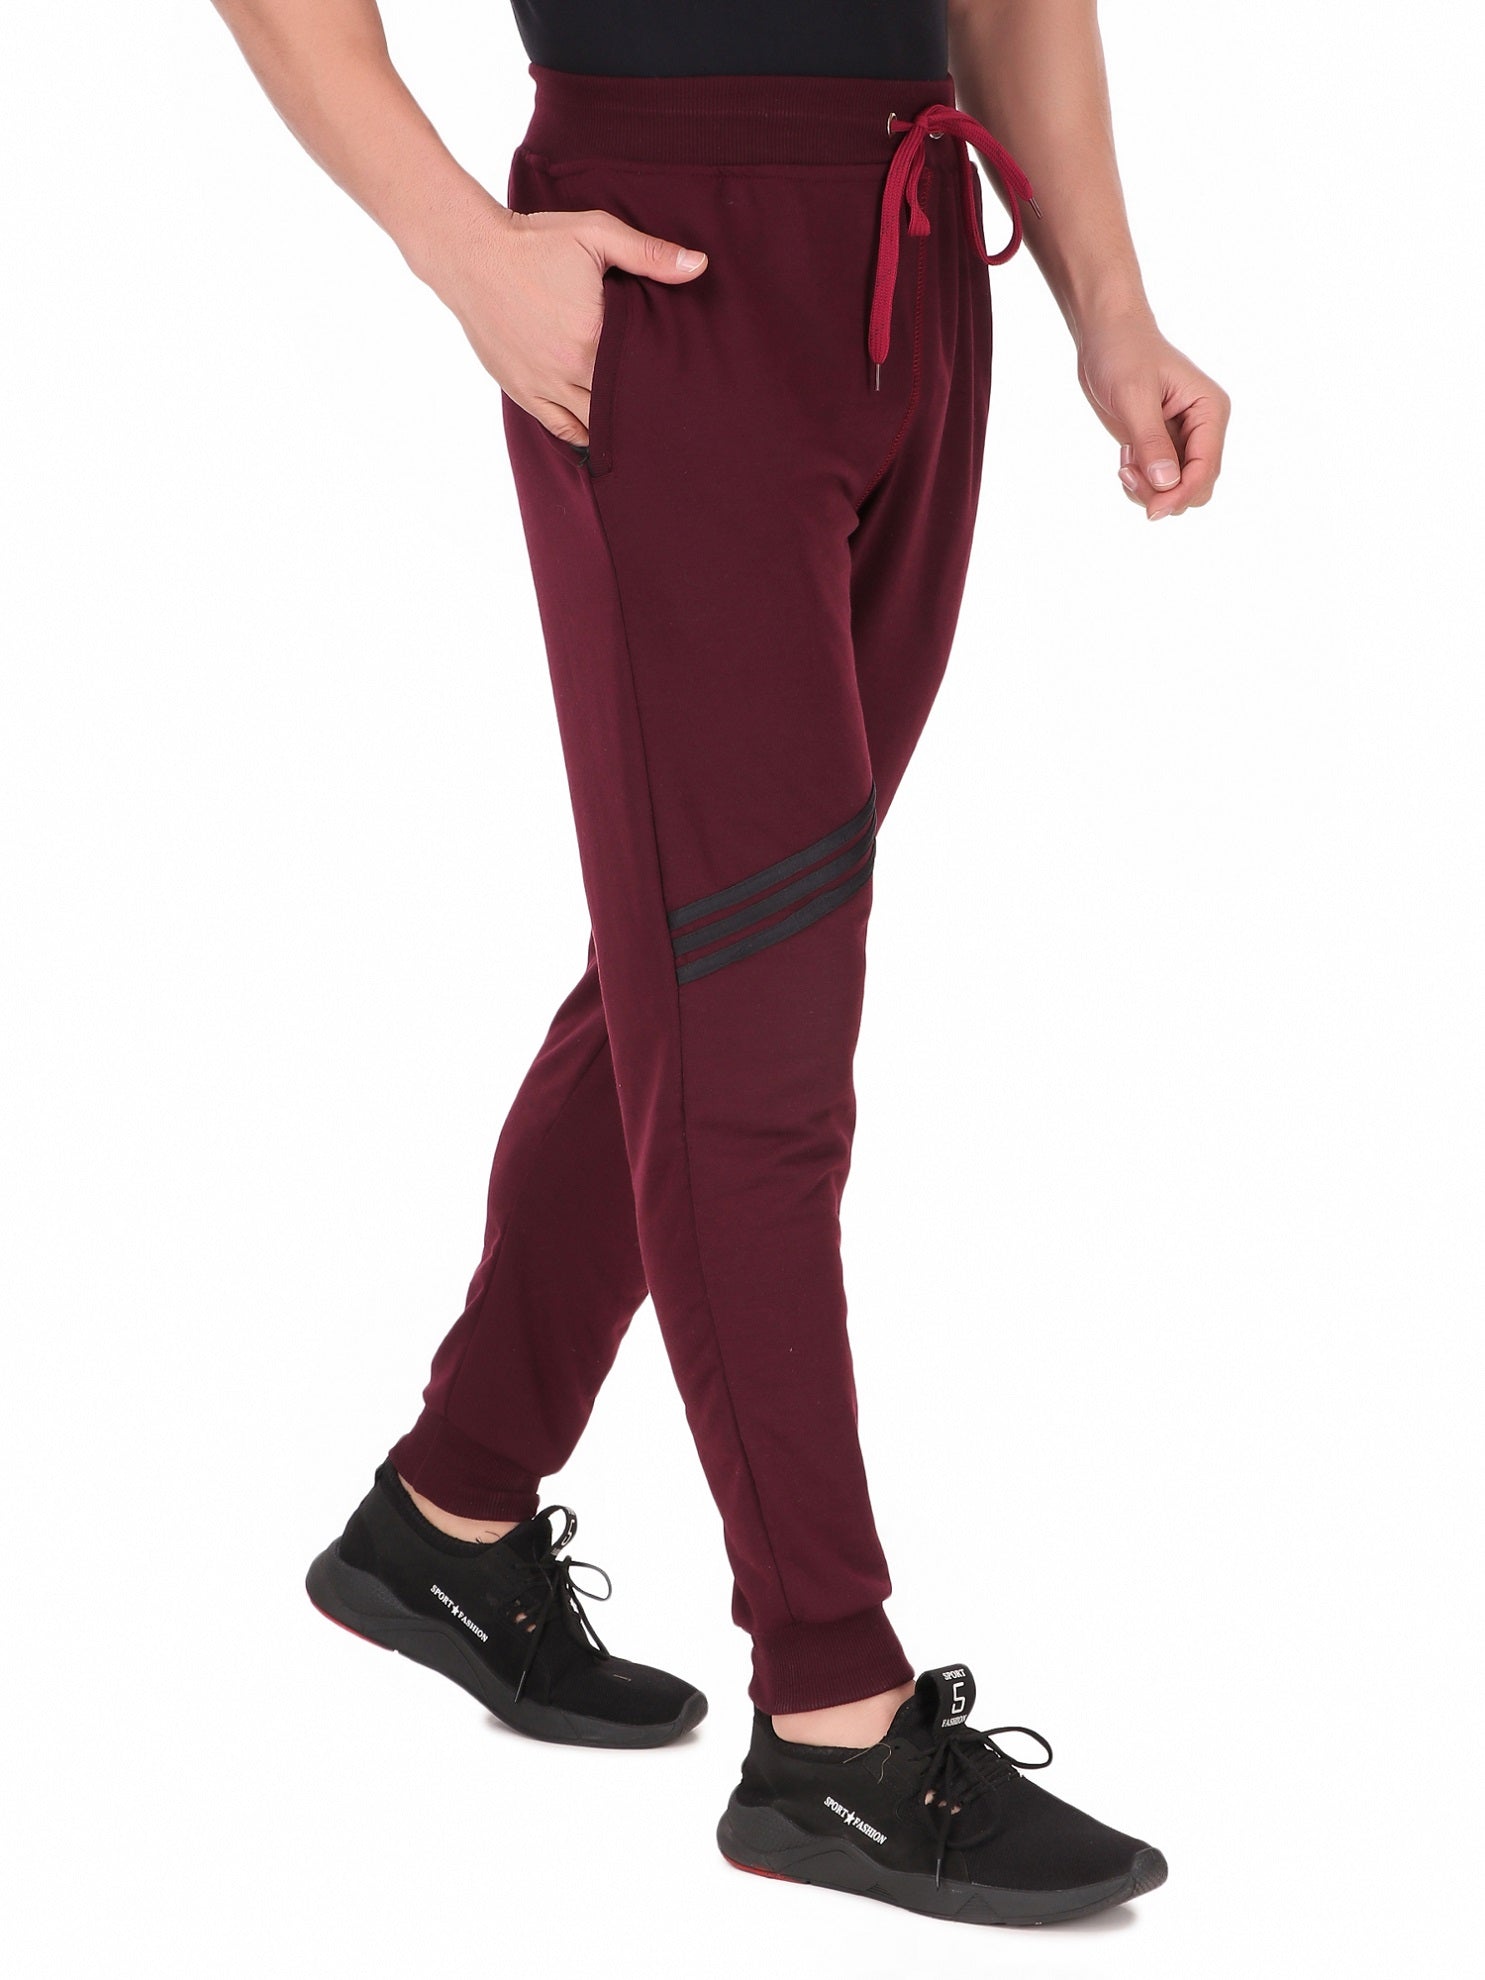 adviicd Track Pants Men Fashion Men's Flat Front Relaxed Fit Casual Pant -  Walmart.com